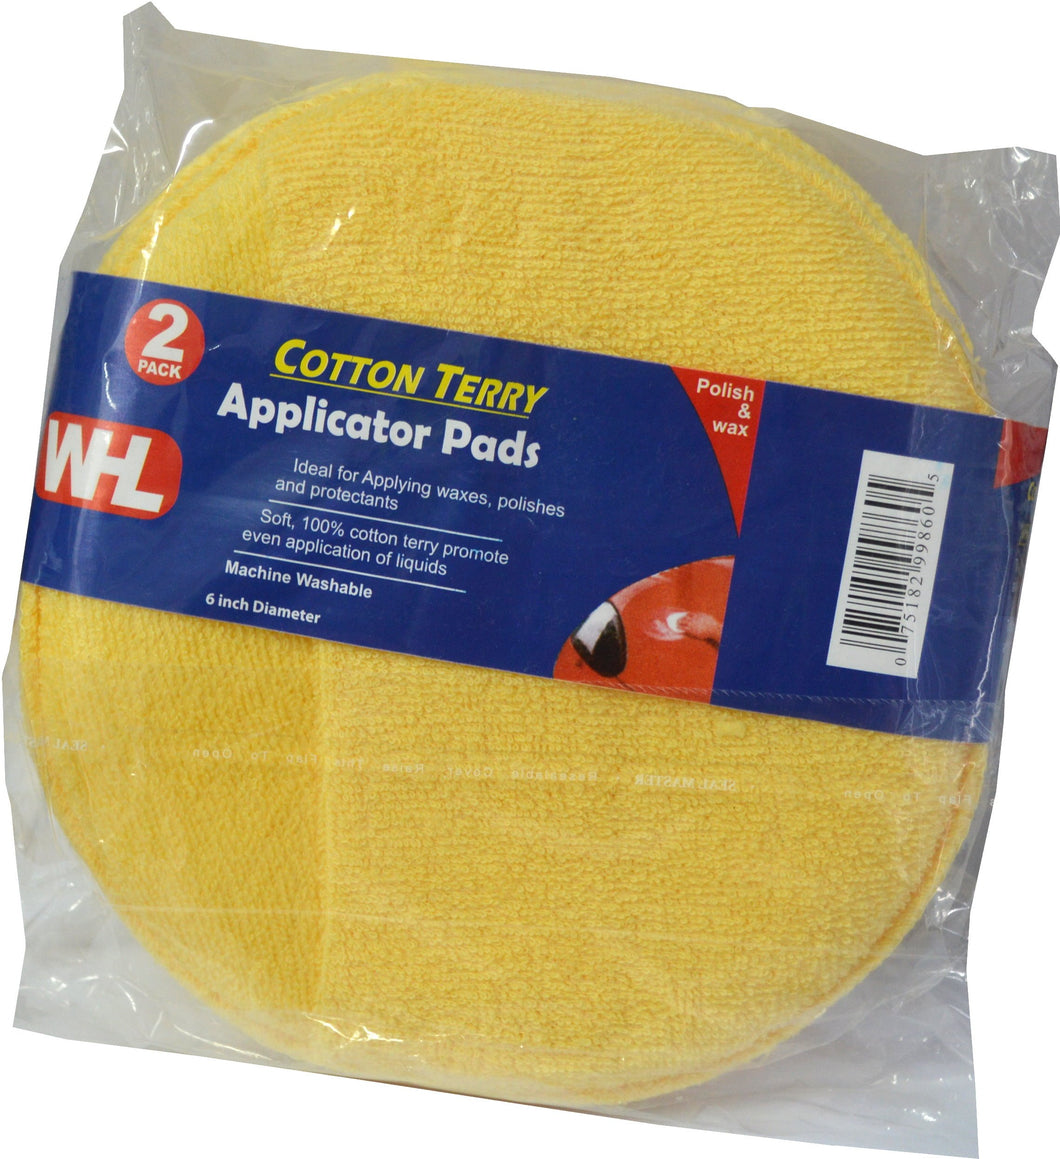 Cotton Terry Applicator Pads 150mm 2 Pack